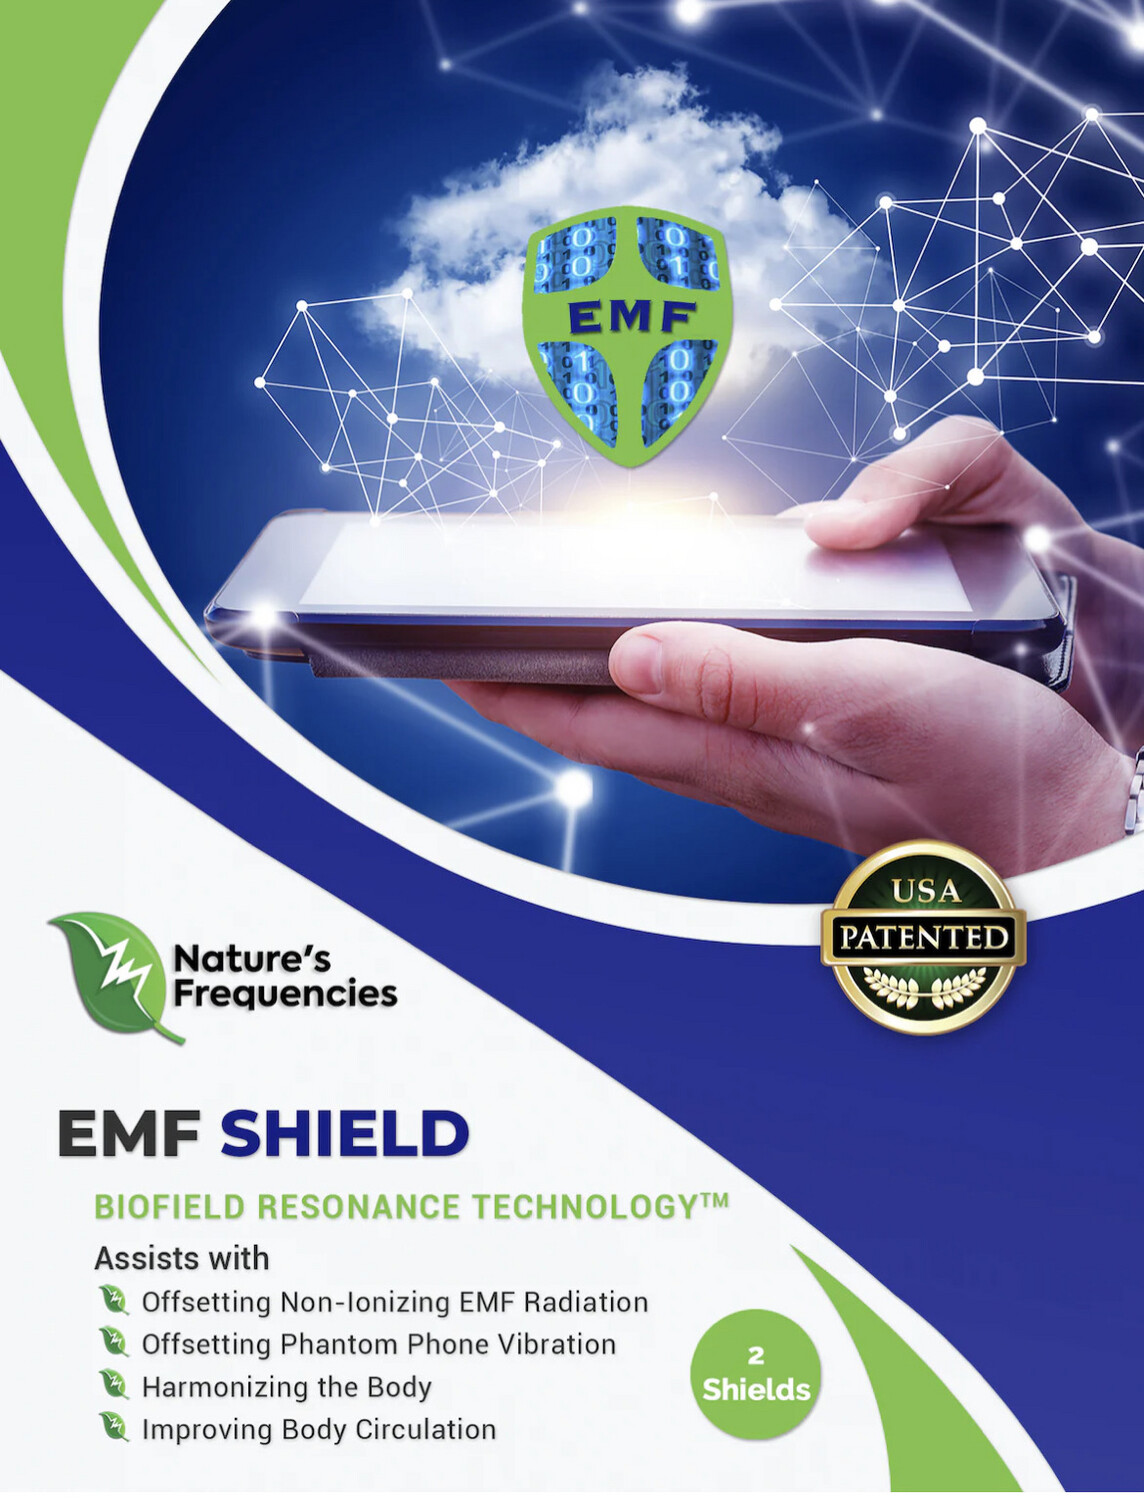 Natures Frequenices EMF Shield 2 Shields